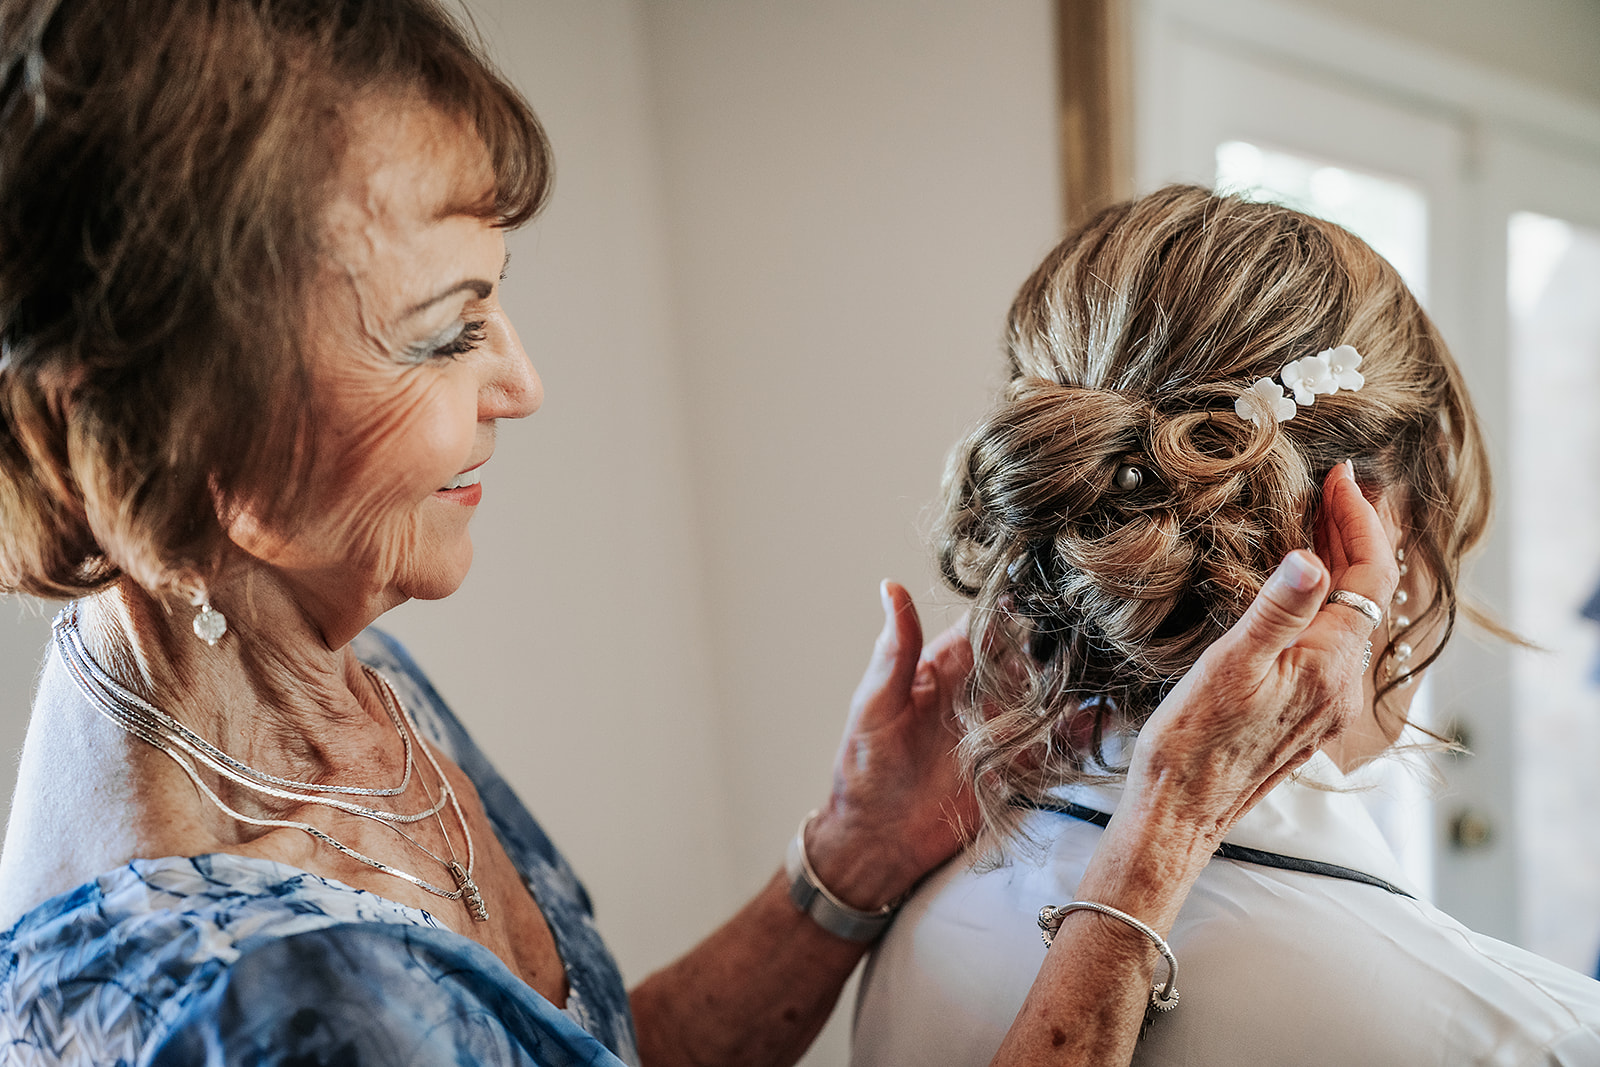 Mother of bride fixing bride's hair